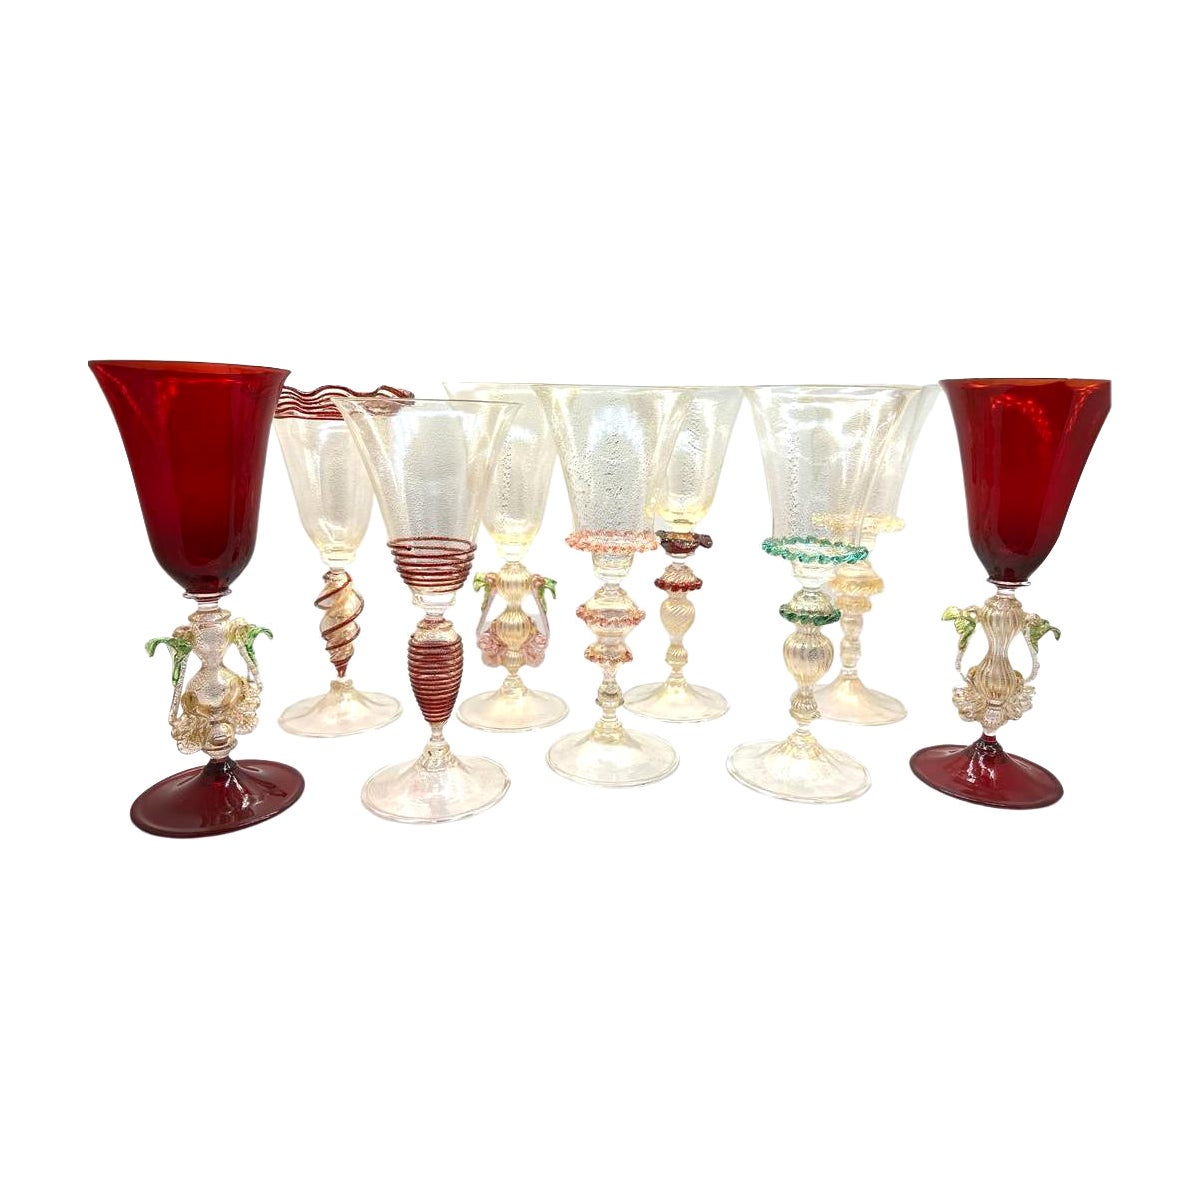 1295 Murano Art Glass Goblets, Set of 9 Pieces Tipetti Collectible For Sale